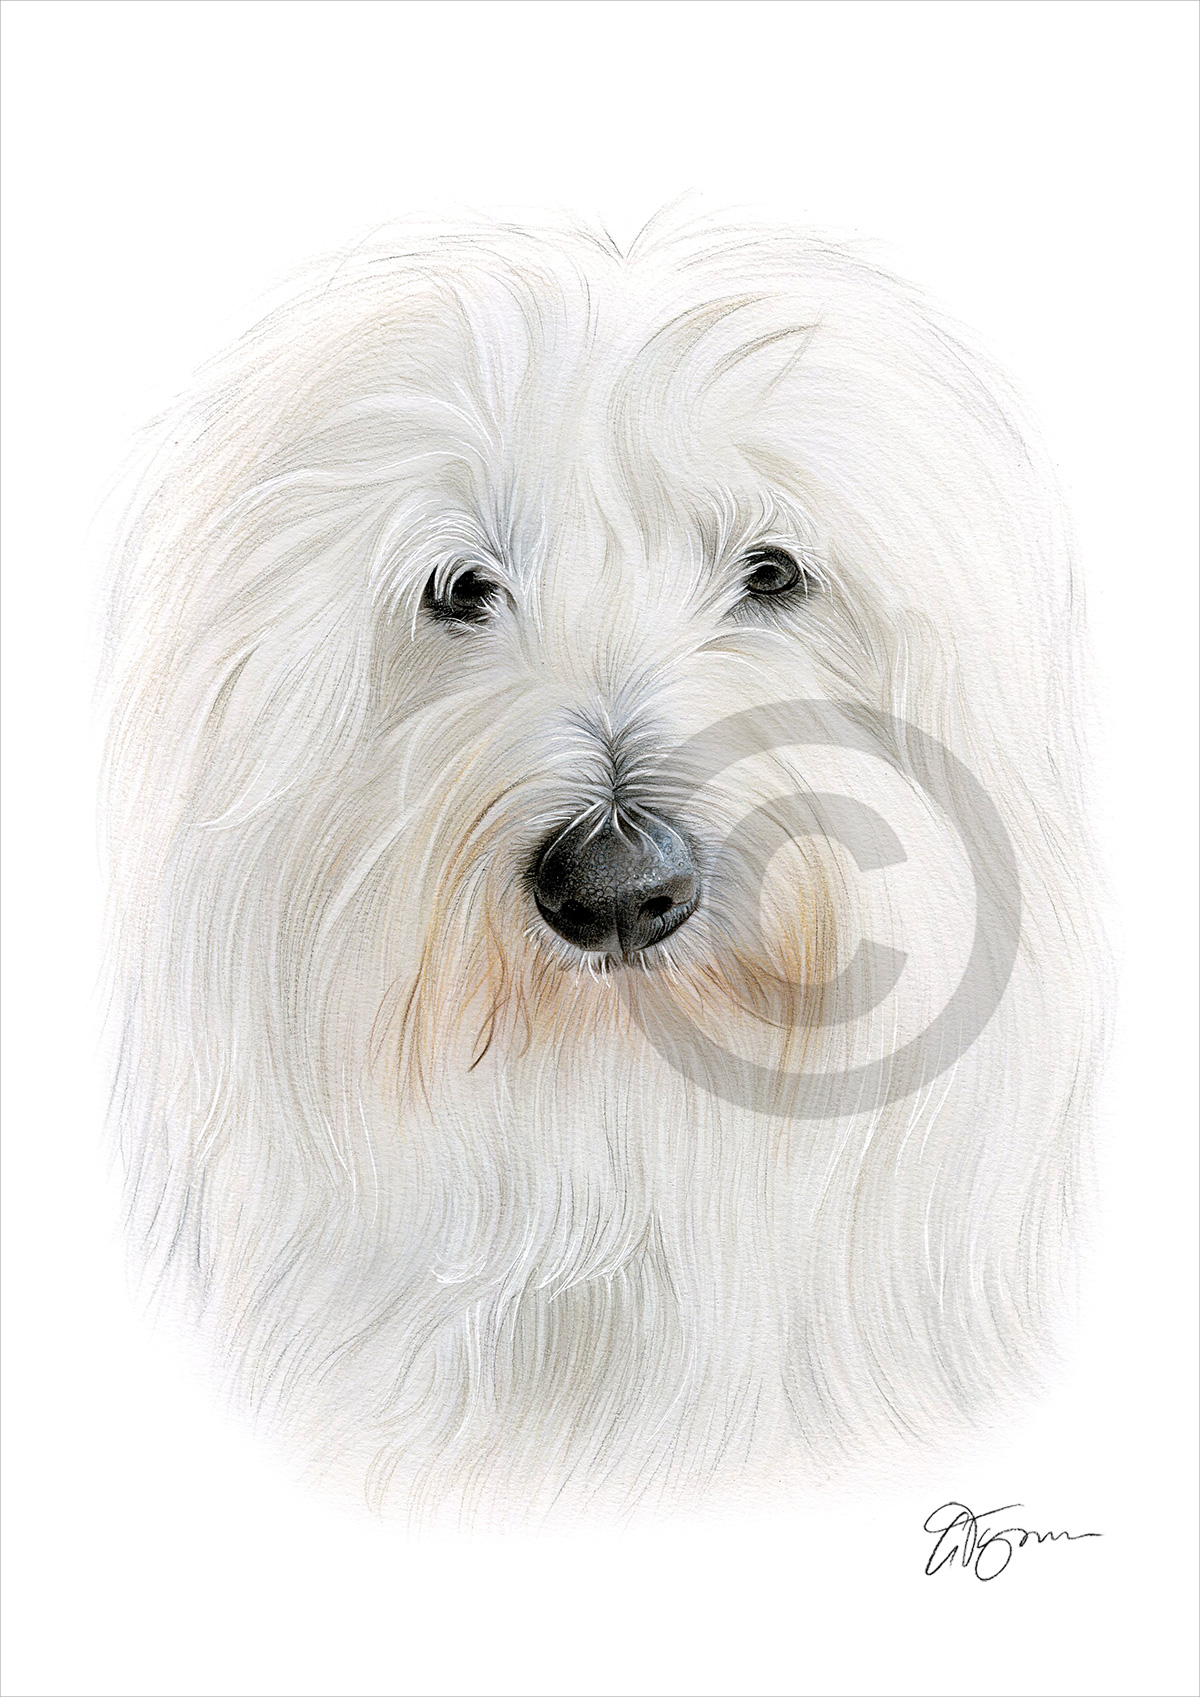 Colour pencil drawing of an Old English Sheepdog by artist Gary Tymon